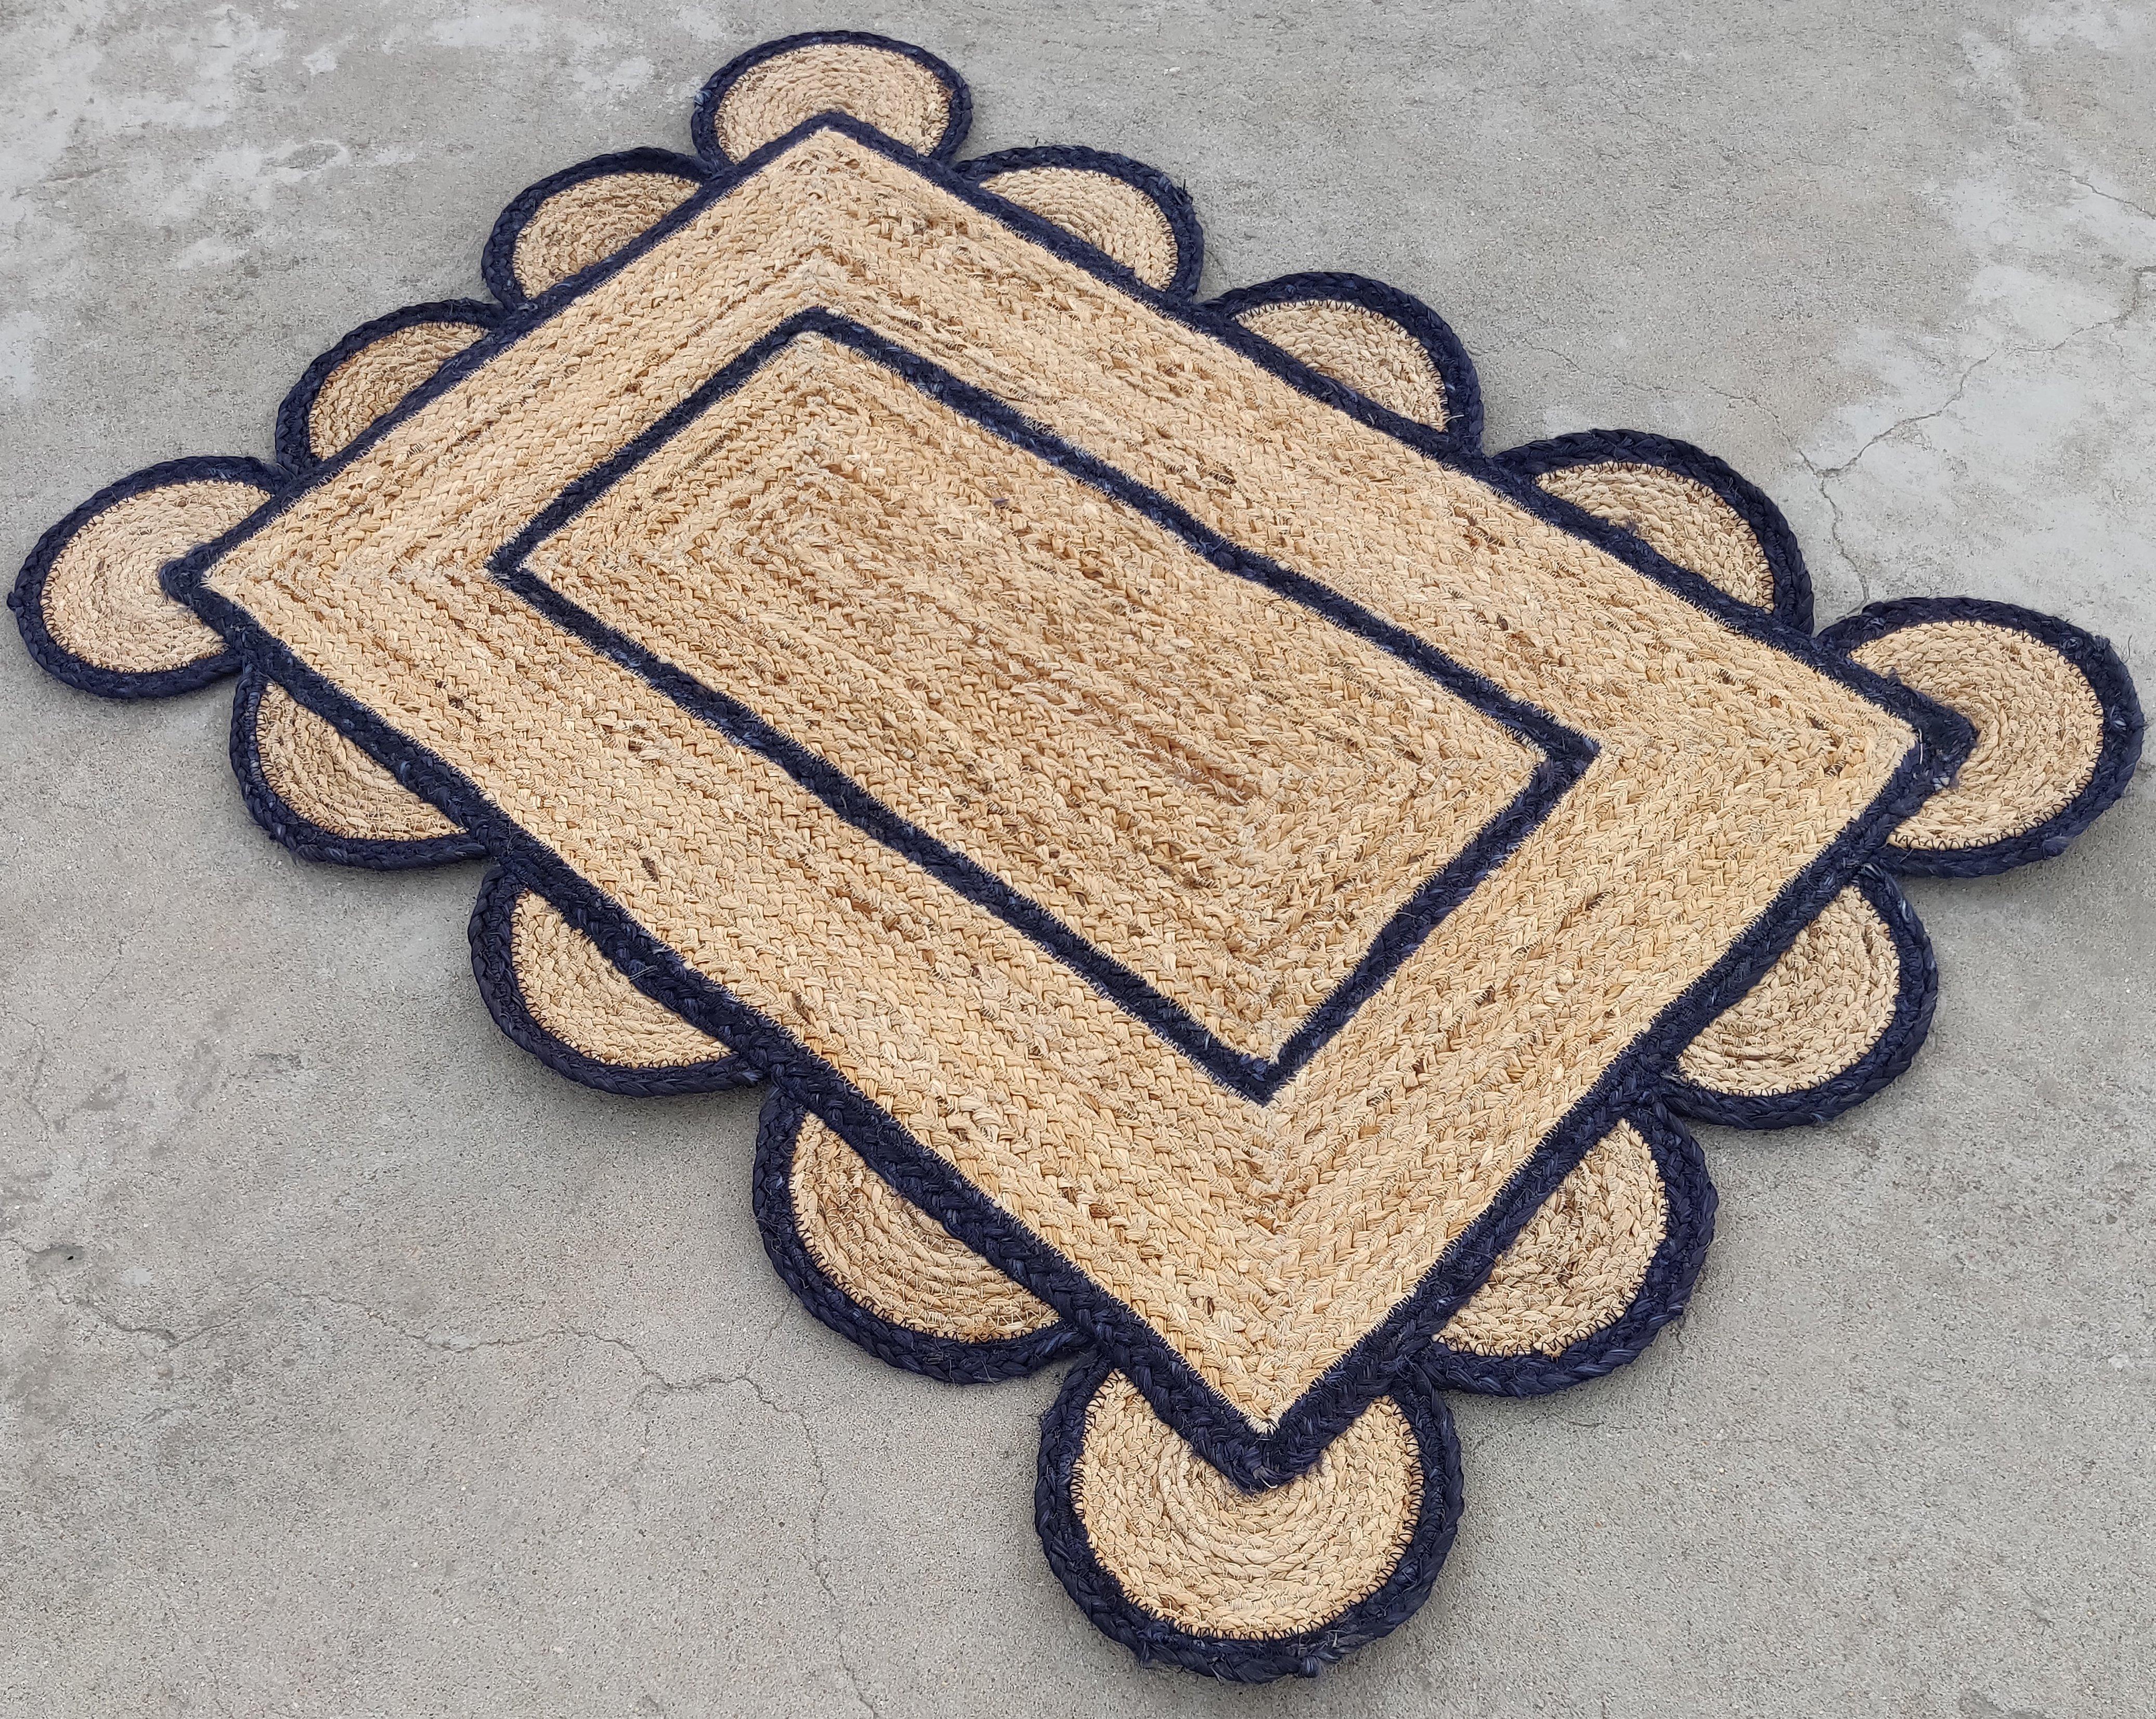 Handmade Jute Scalloped Rug, Natural Jute Dhurrie with Navy Blue Border -2'x3'

These special flat-weave dhurries are hand-woven with 15 ply 100% cotton yarn. Due to the special manufacturing techniques used to create our rugs, the size and color of